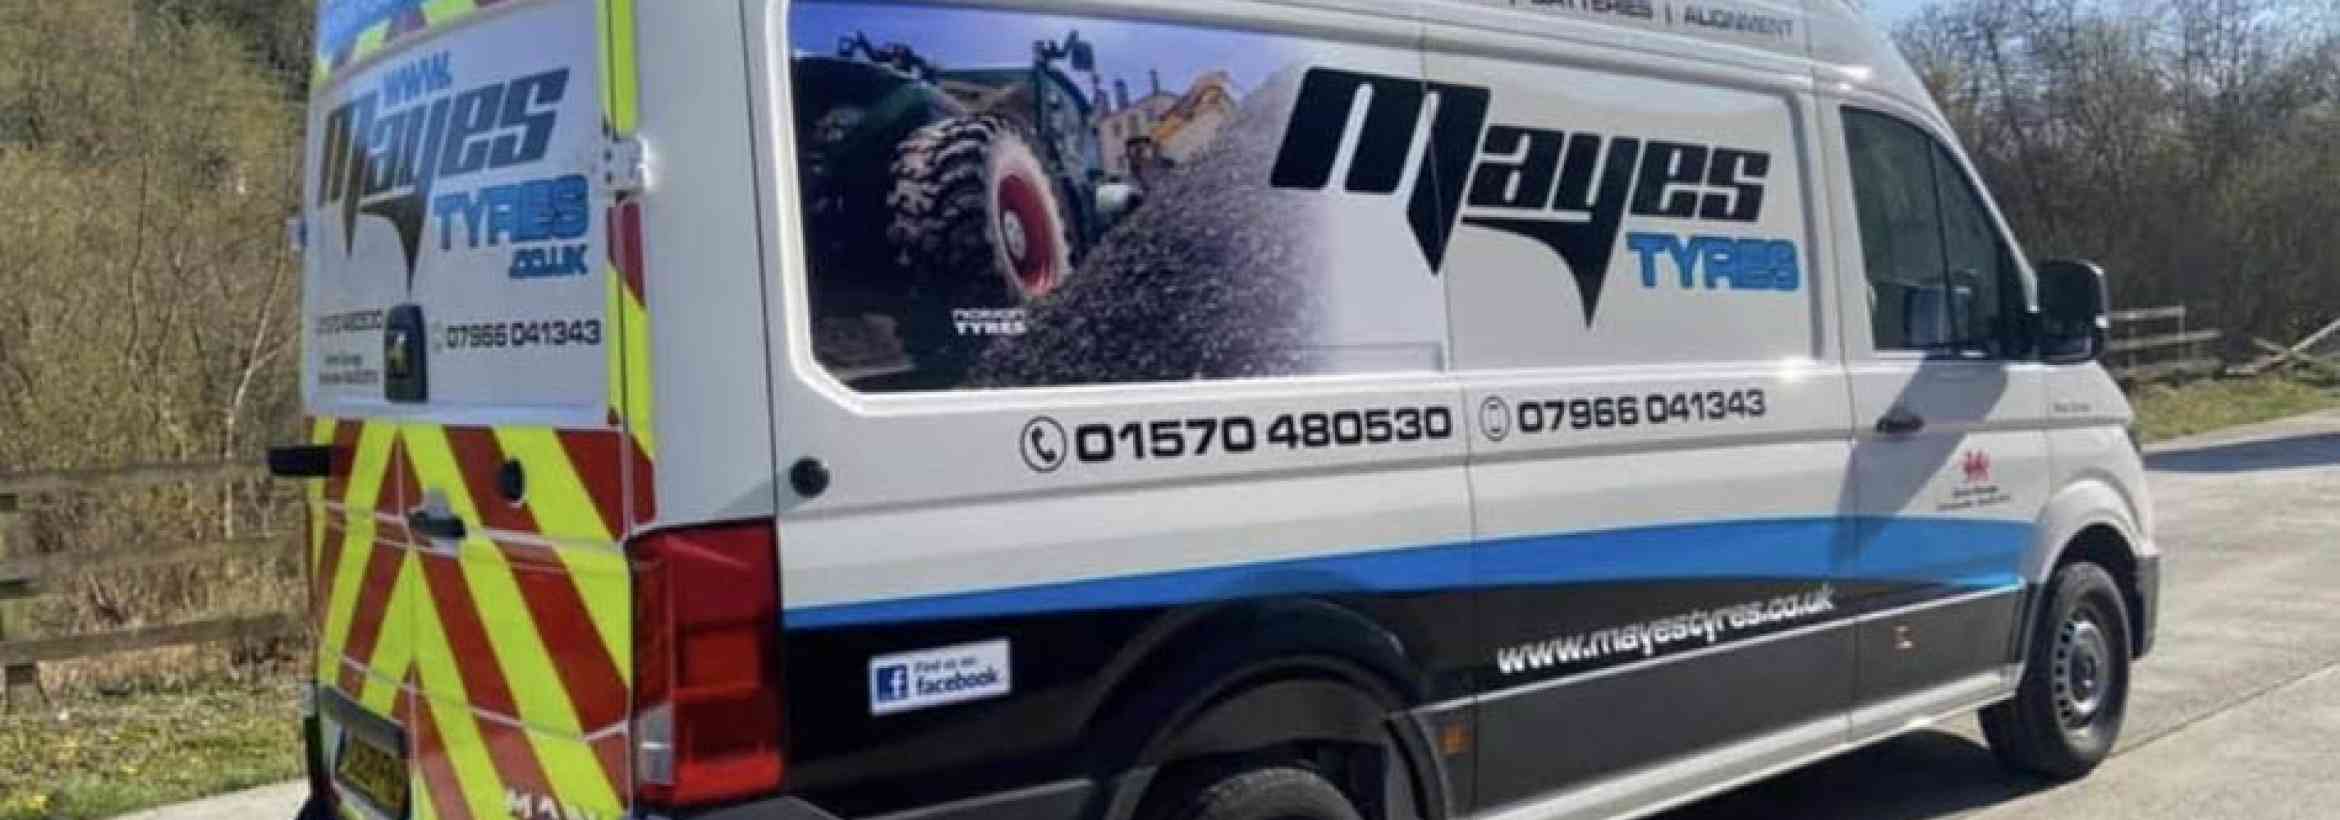 WOW! Mayes Tyres - what a difference great livery makes